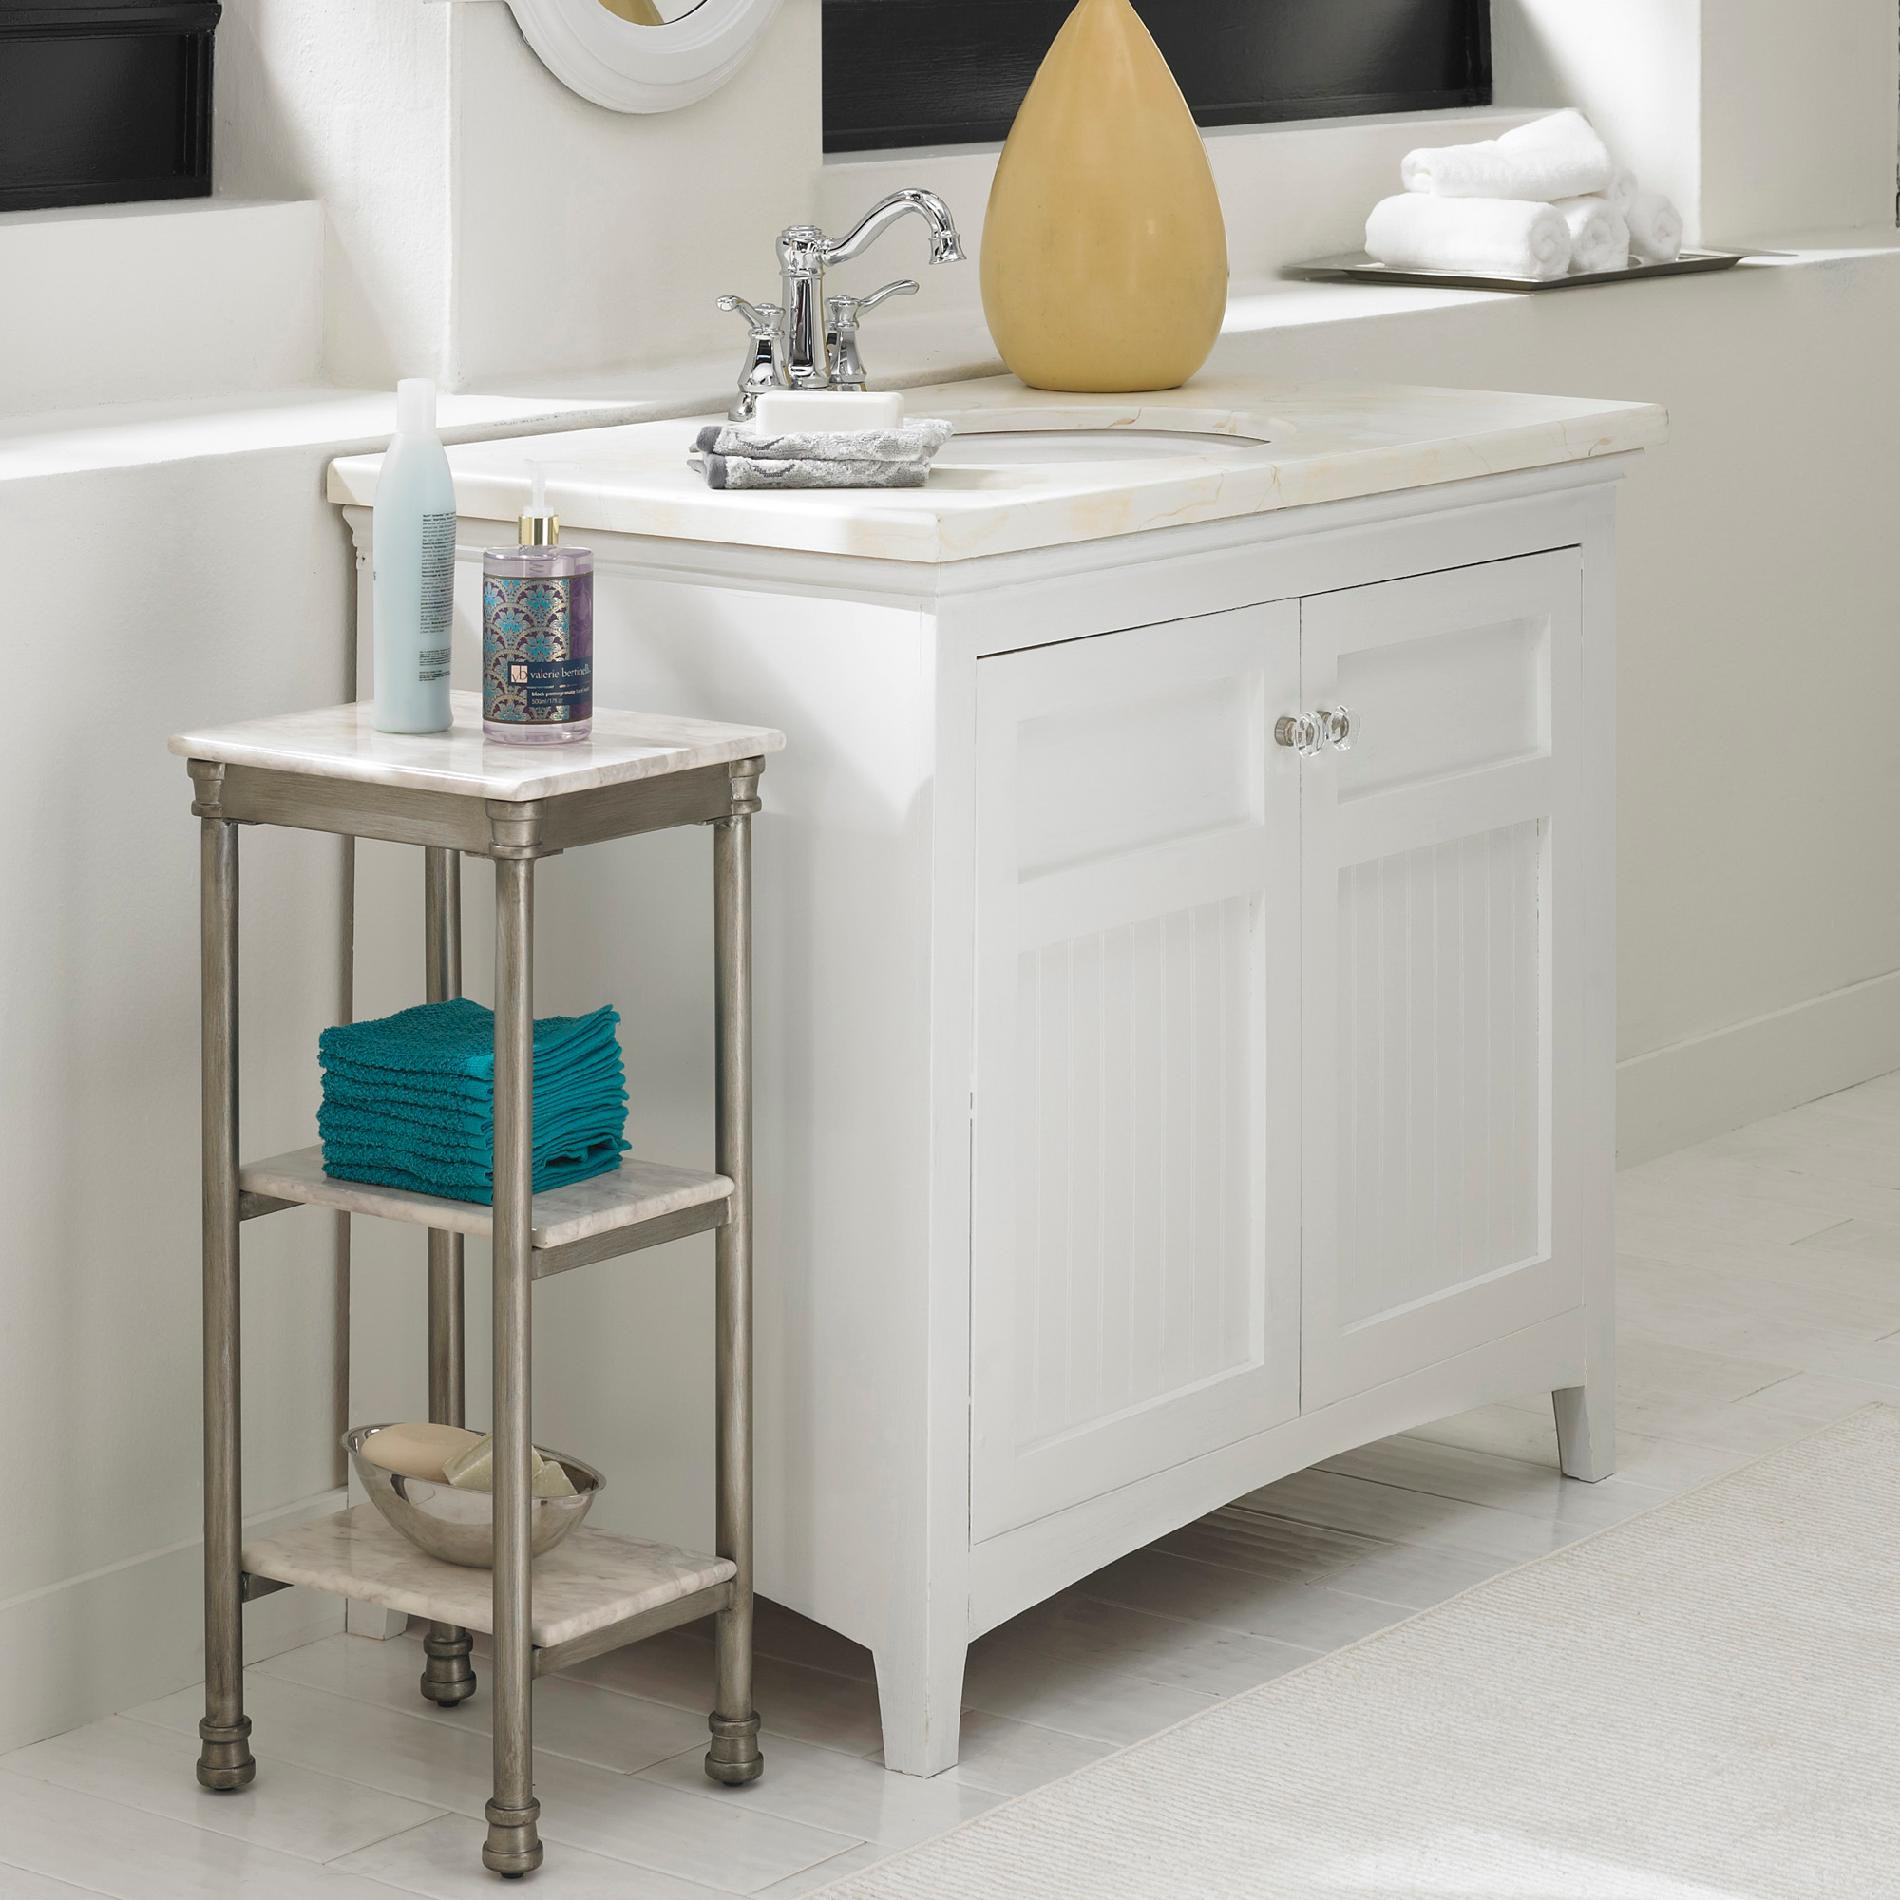 Small Table For Bathroom
 Essential Home 5 Shelf Storage Tower Home Furniture